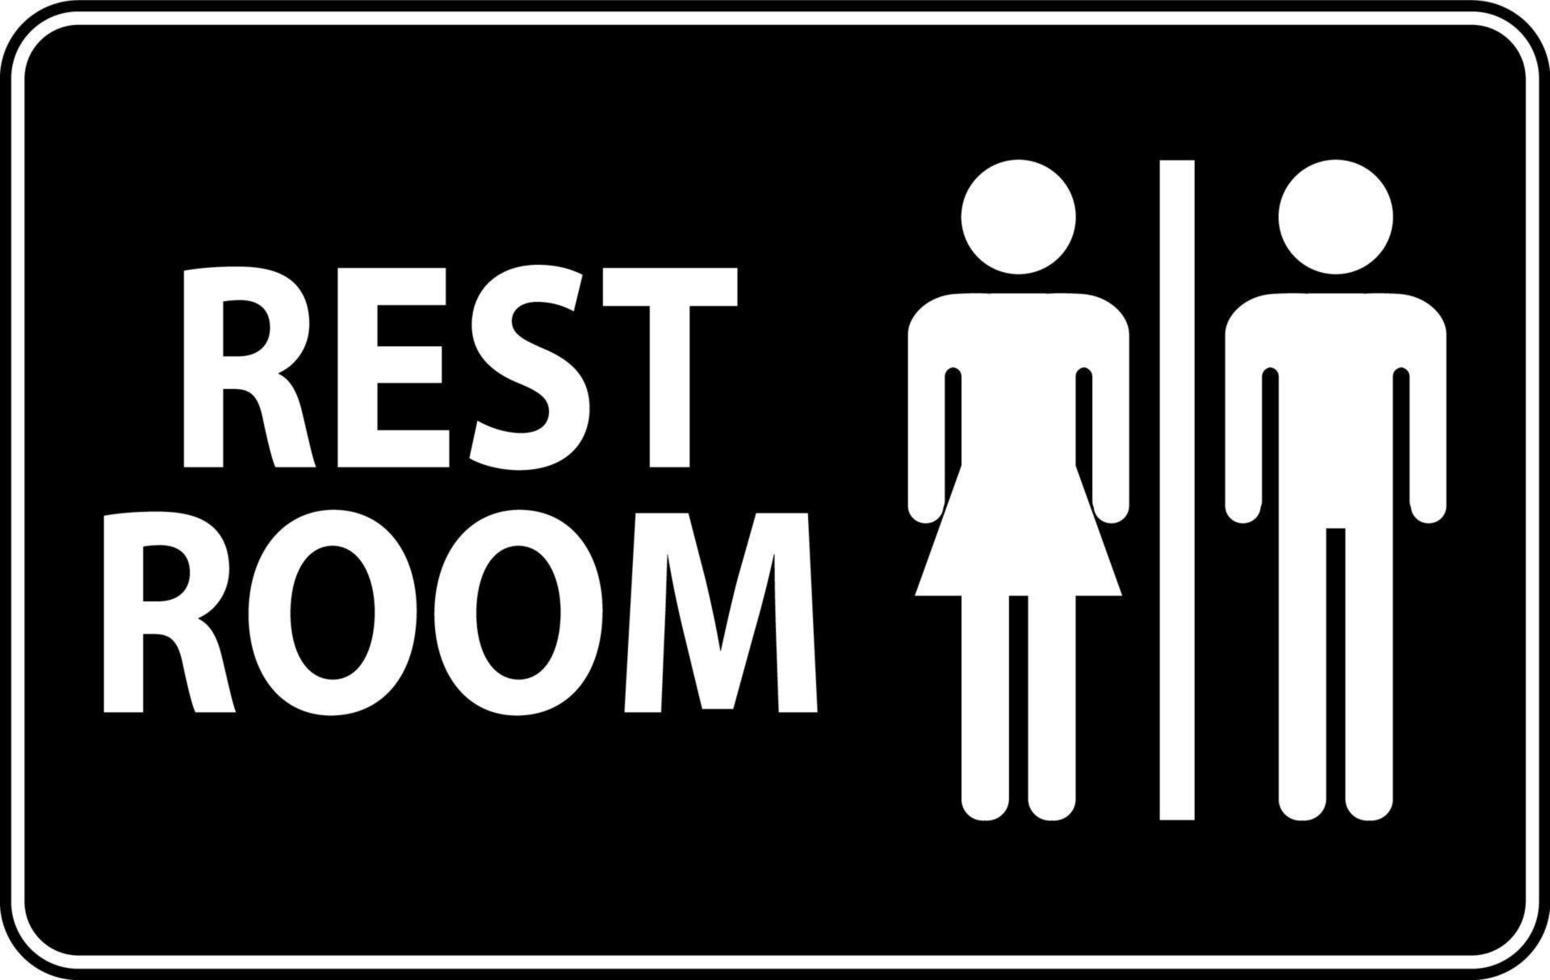 Symbol Bathroom Sign Restroom With Man and Woman Sign vector